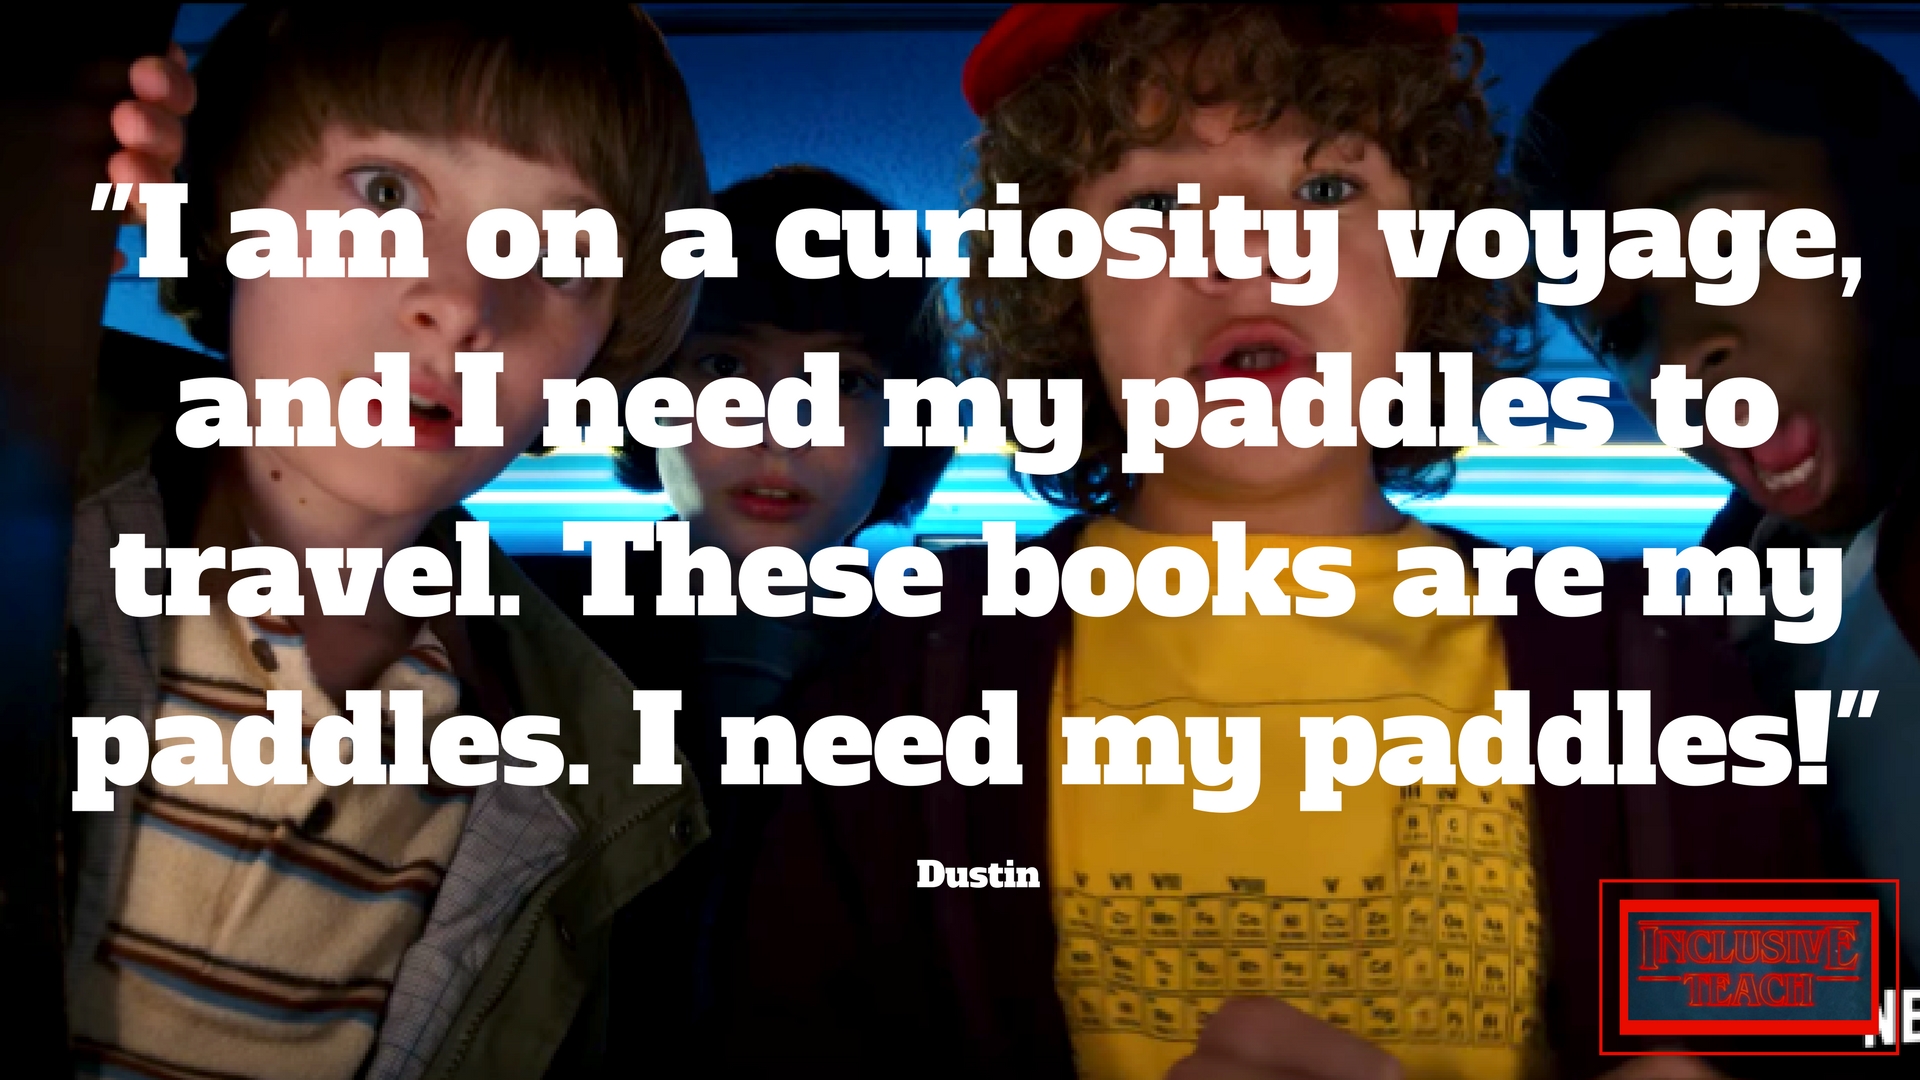 I am on a curiosity voyage, and I need my paddles to travel. These books are my paddles. I need my paddles! Stranger things quote